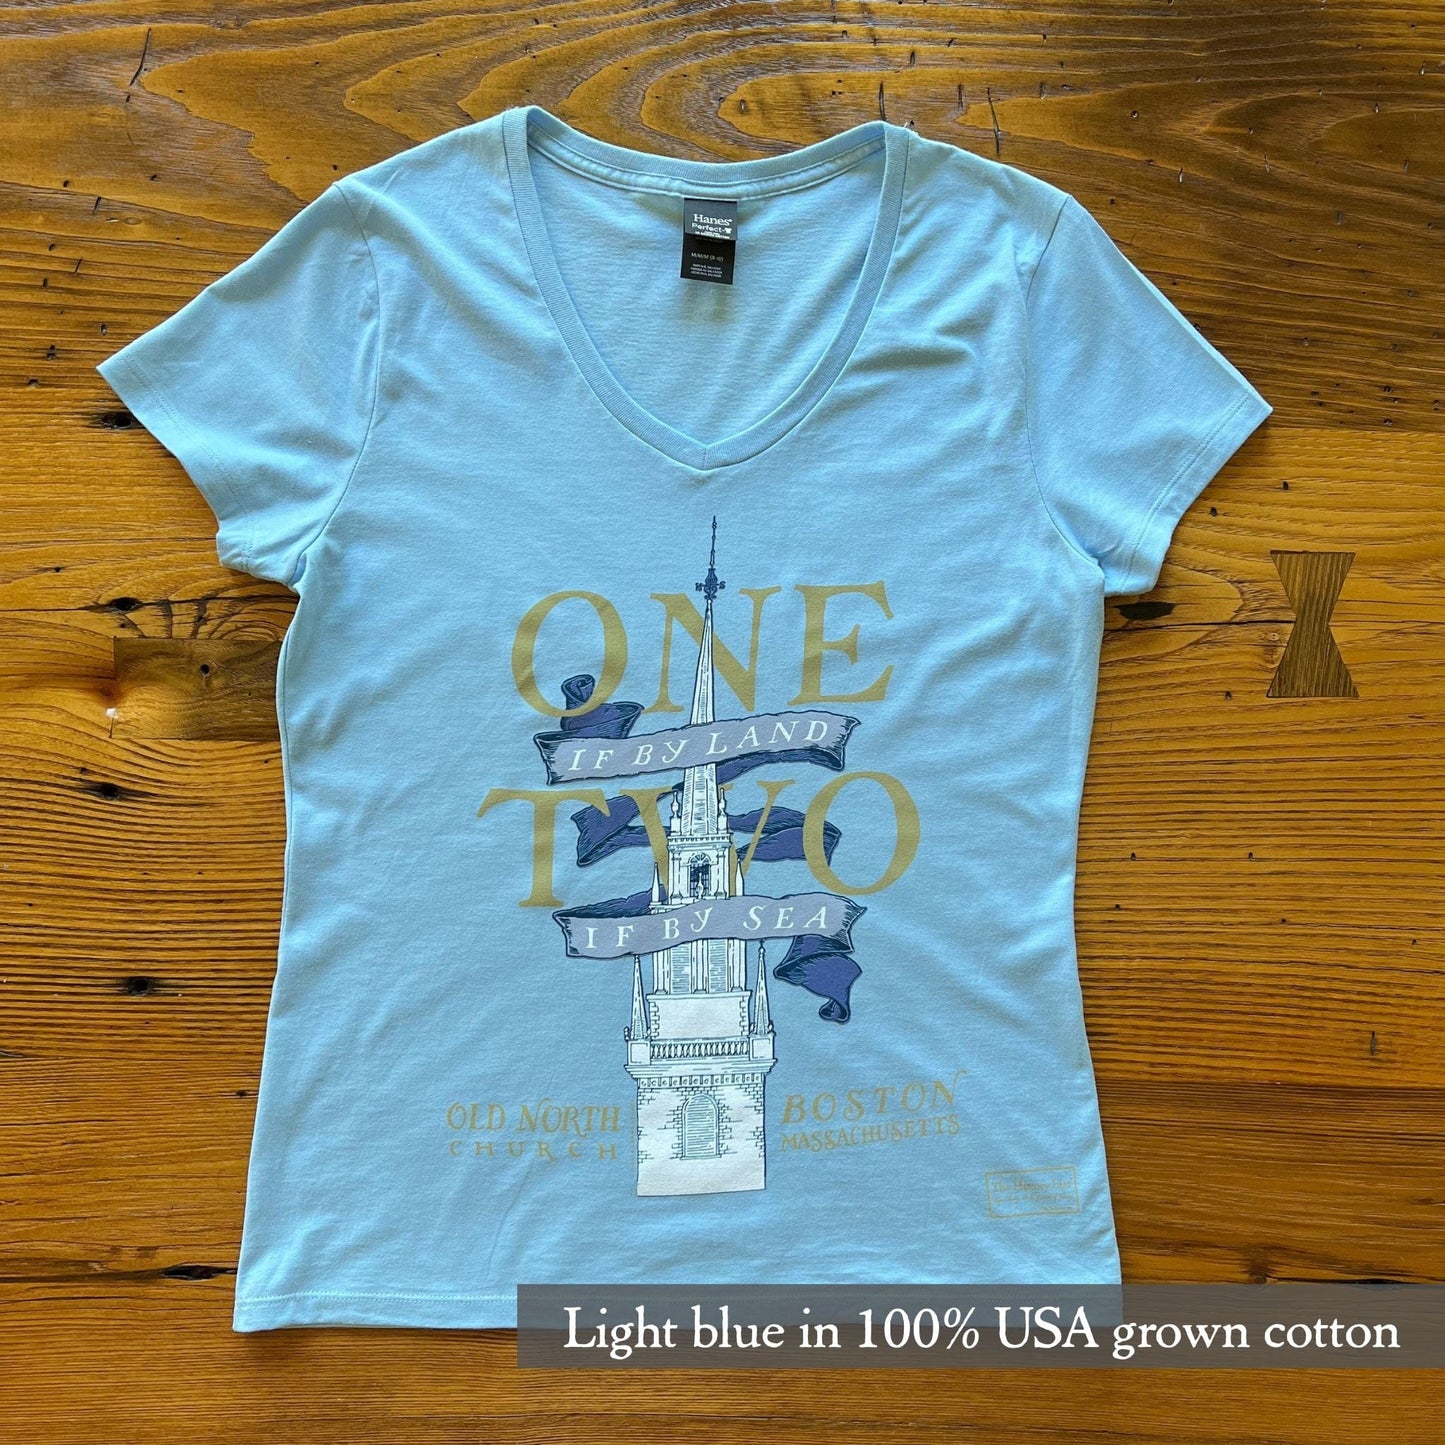 "One if by land . . ." Old North Special Edition Women's v-neck shirt from the History list store